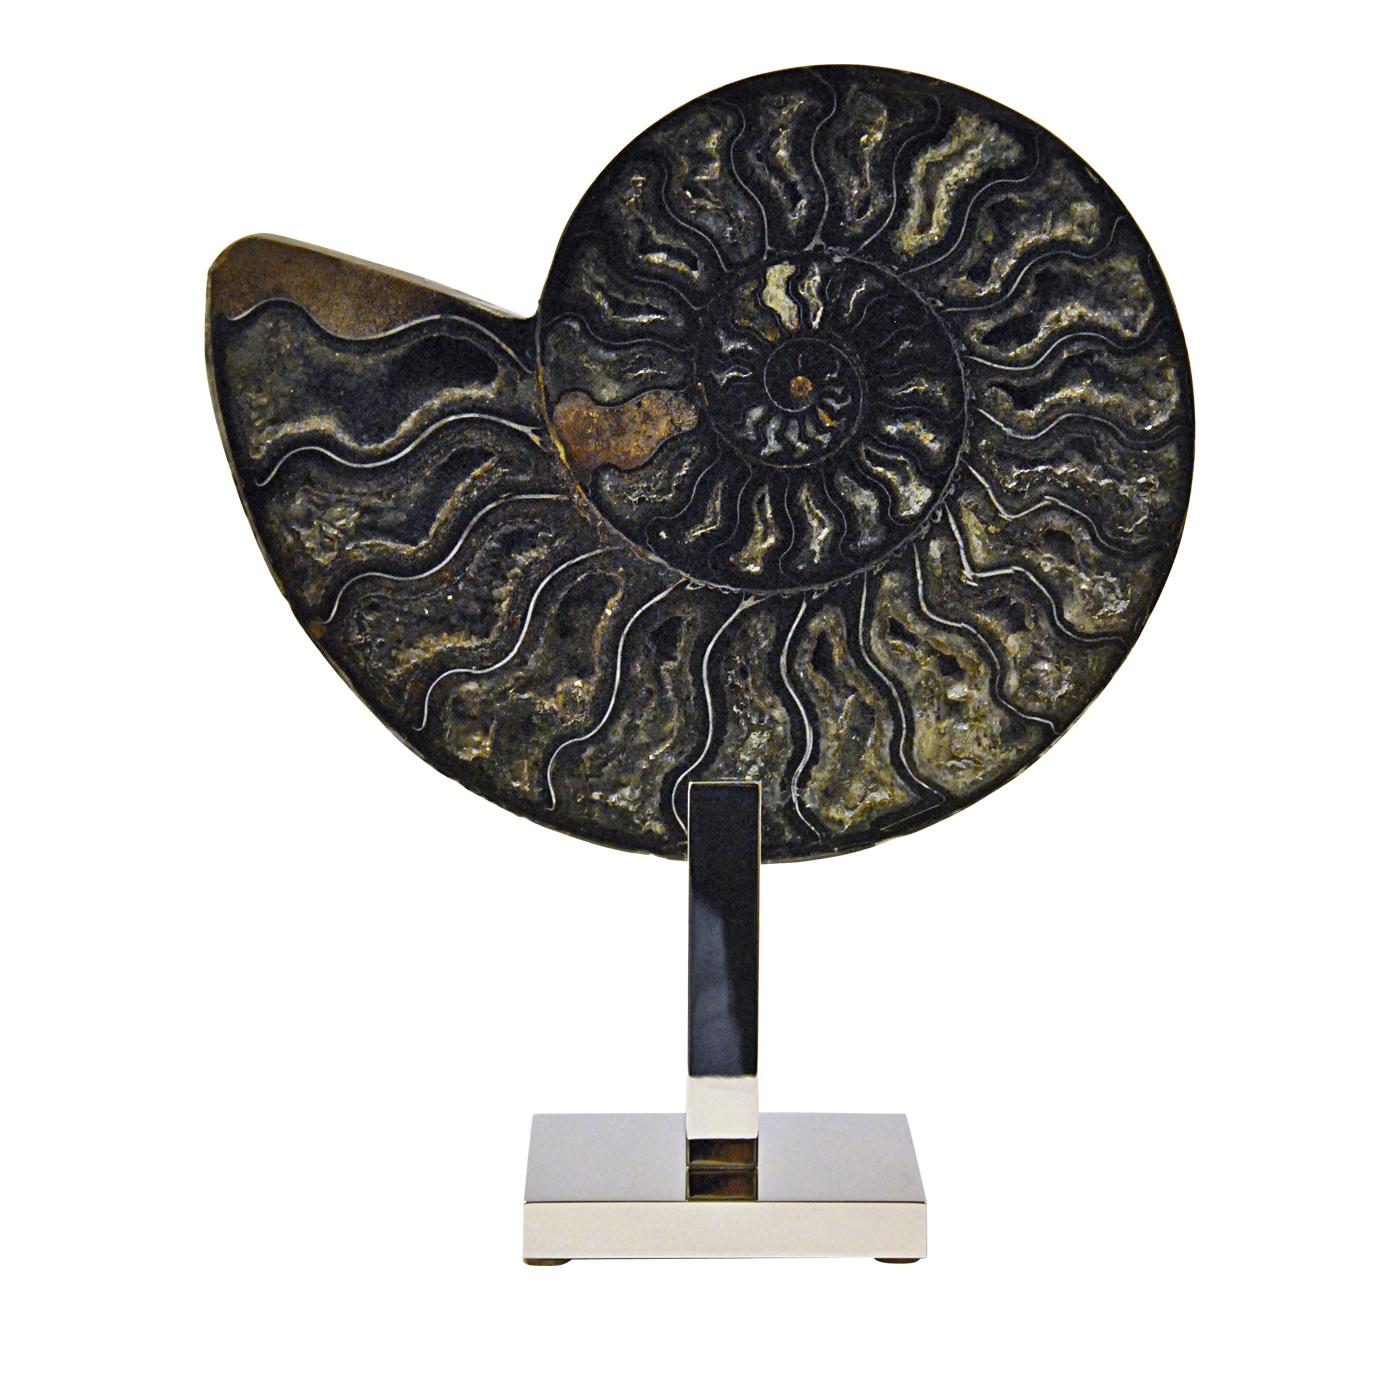 With its earth tones nuances, this magnificent piece features an ammonite fossil cut in half to reveal its inner structure, placed on a Minimalist brass base with a polished silver finish. Appreciated for their spectacular ornamental displays, this